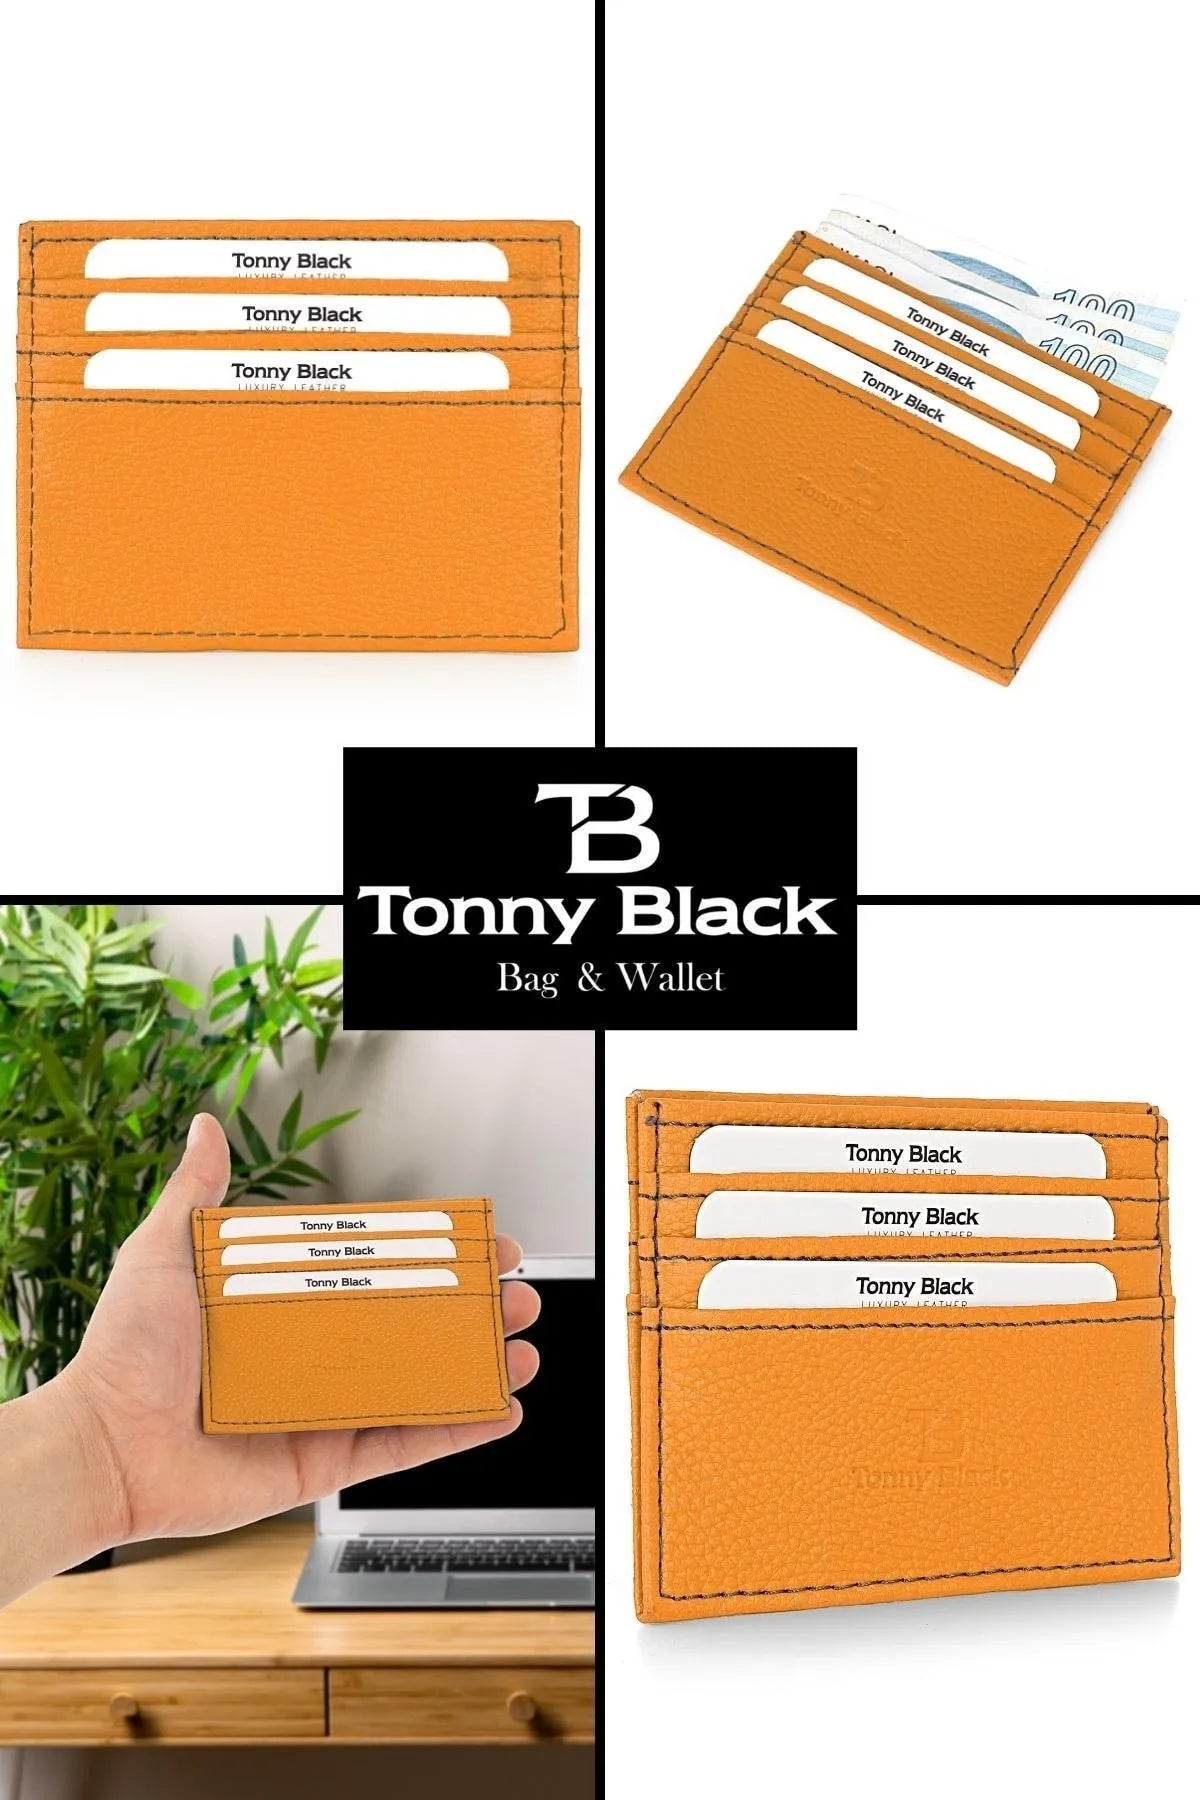 Original Boxed Unisex Super Slim Leather Thin Model Credit Card & Business Card Holder in Yellow